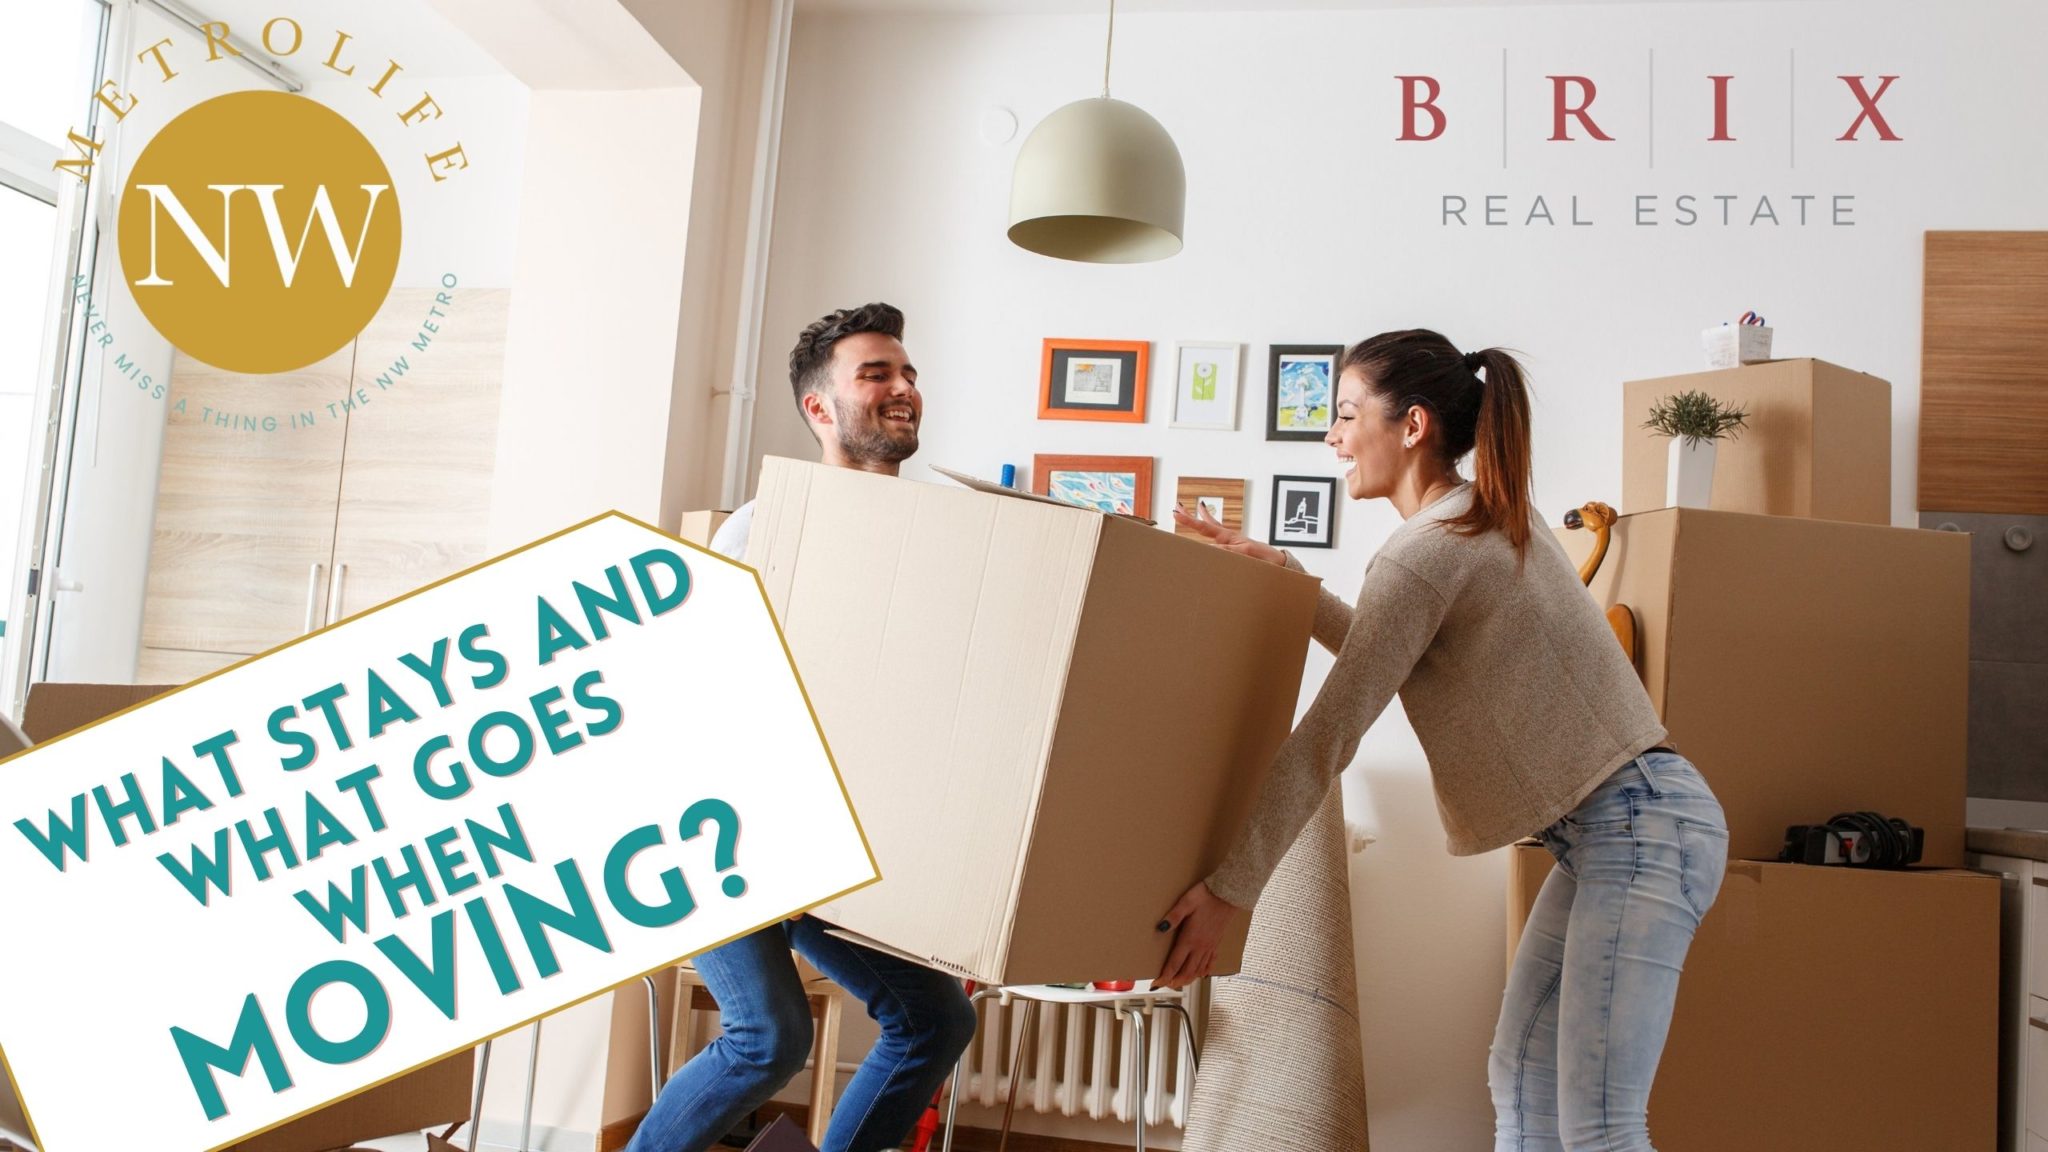 What stays and what goes when moving?